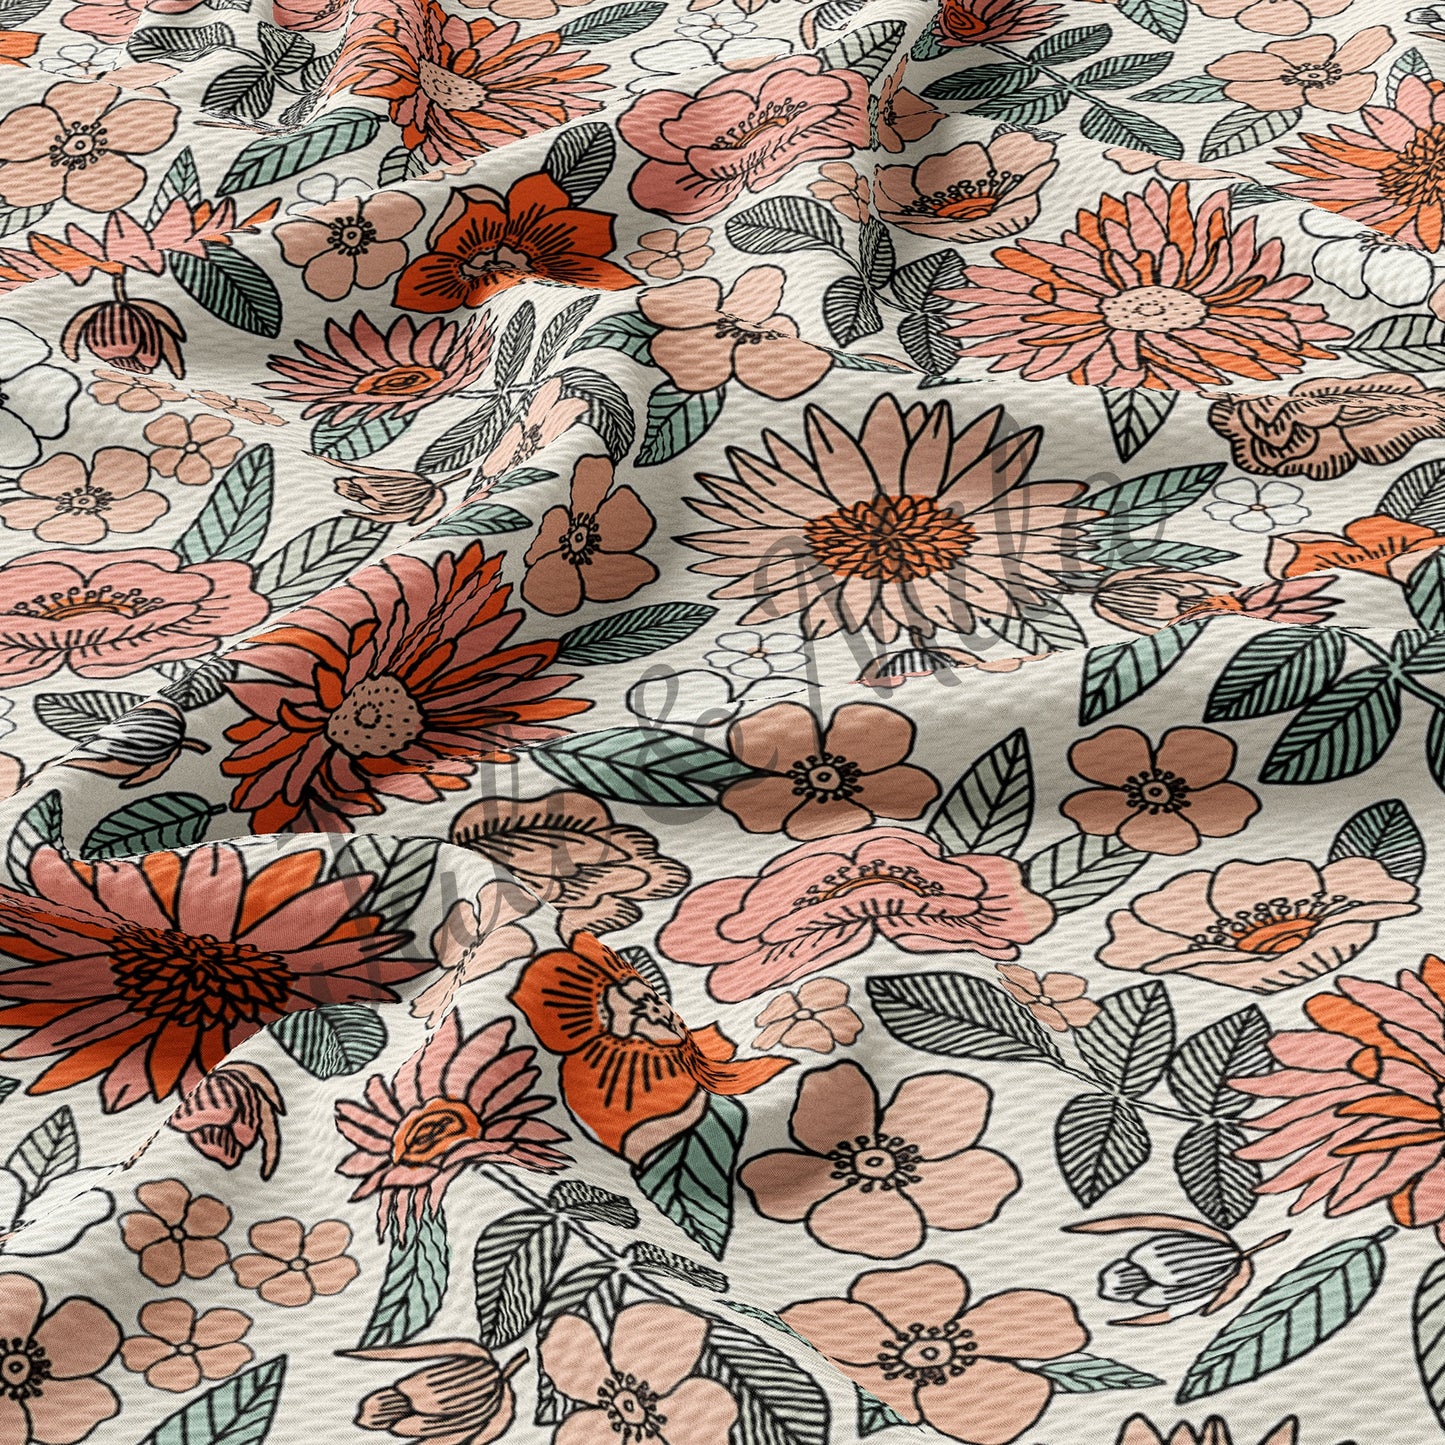 Floral  Bullet Textured Fabric  Floral56